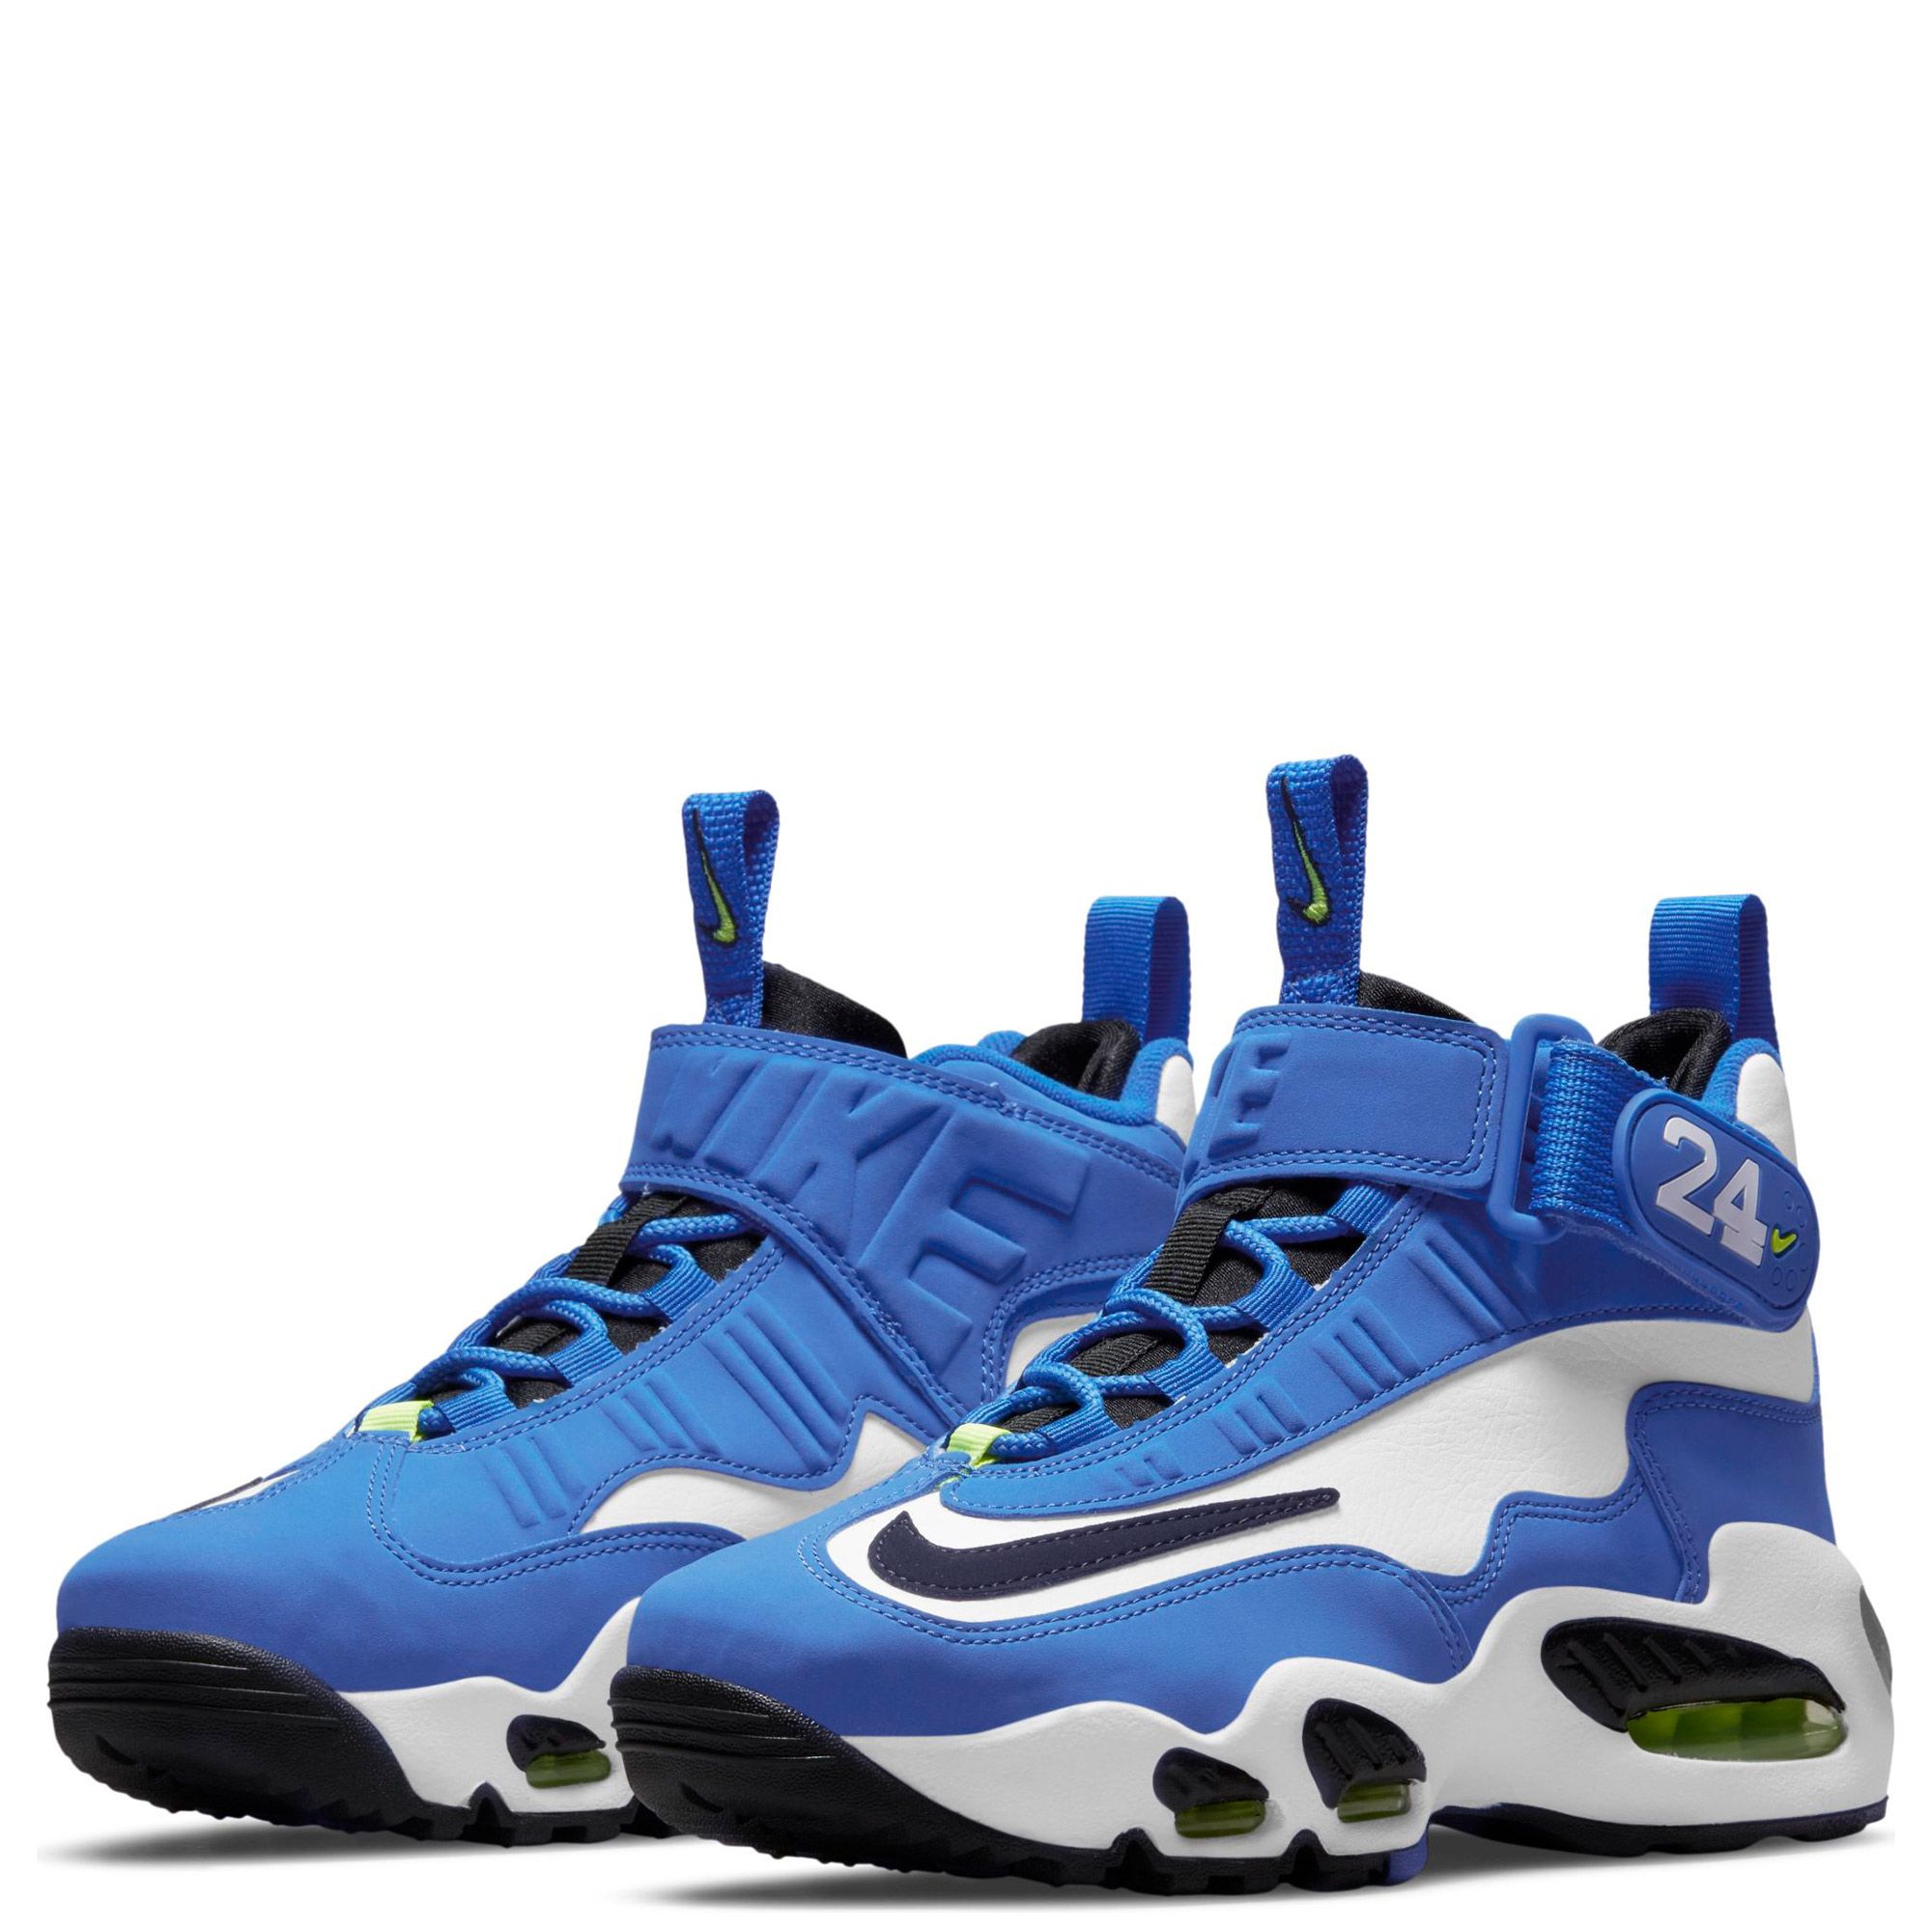 Nike GS Air Griffey Max 1 - Nohble